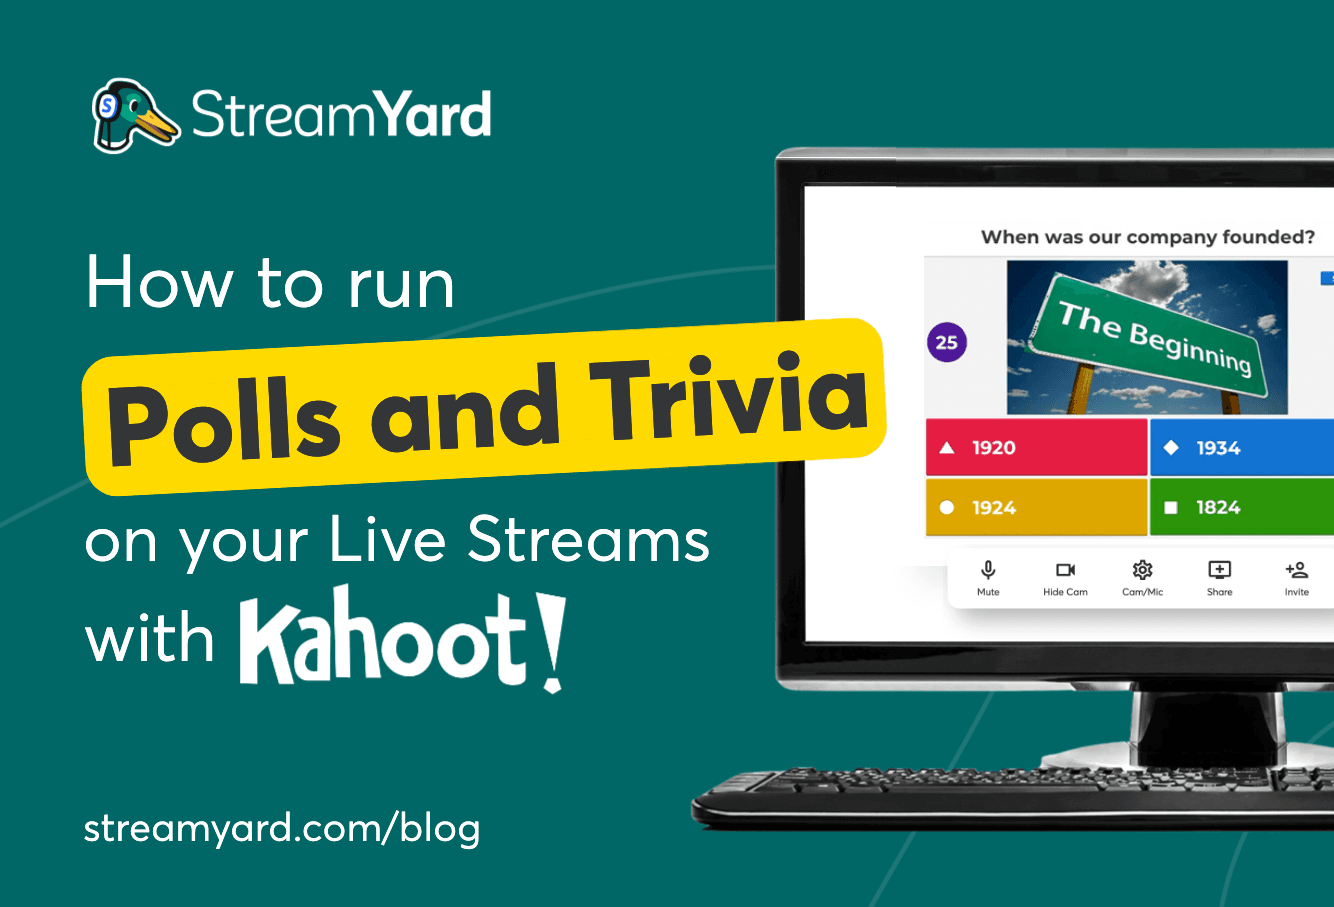 Learn how to use Kahoot in StreamYard and run polls, trivia, quizzes on more in your live streams.